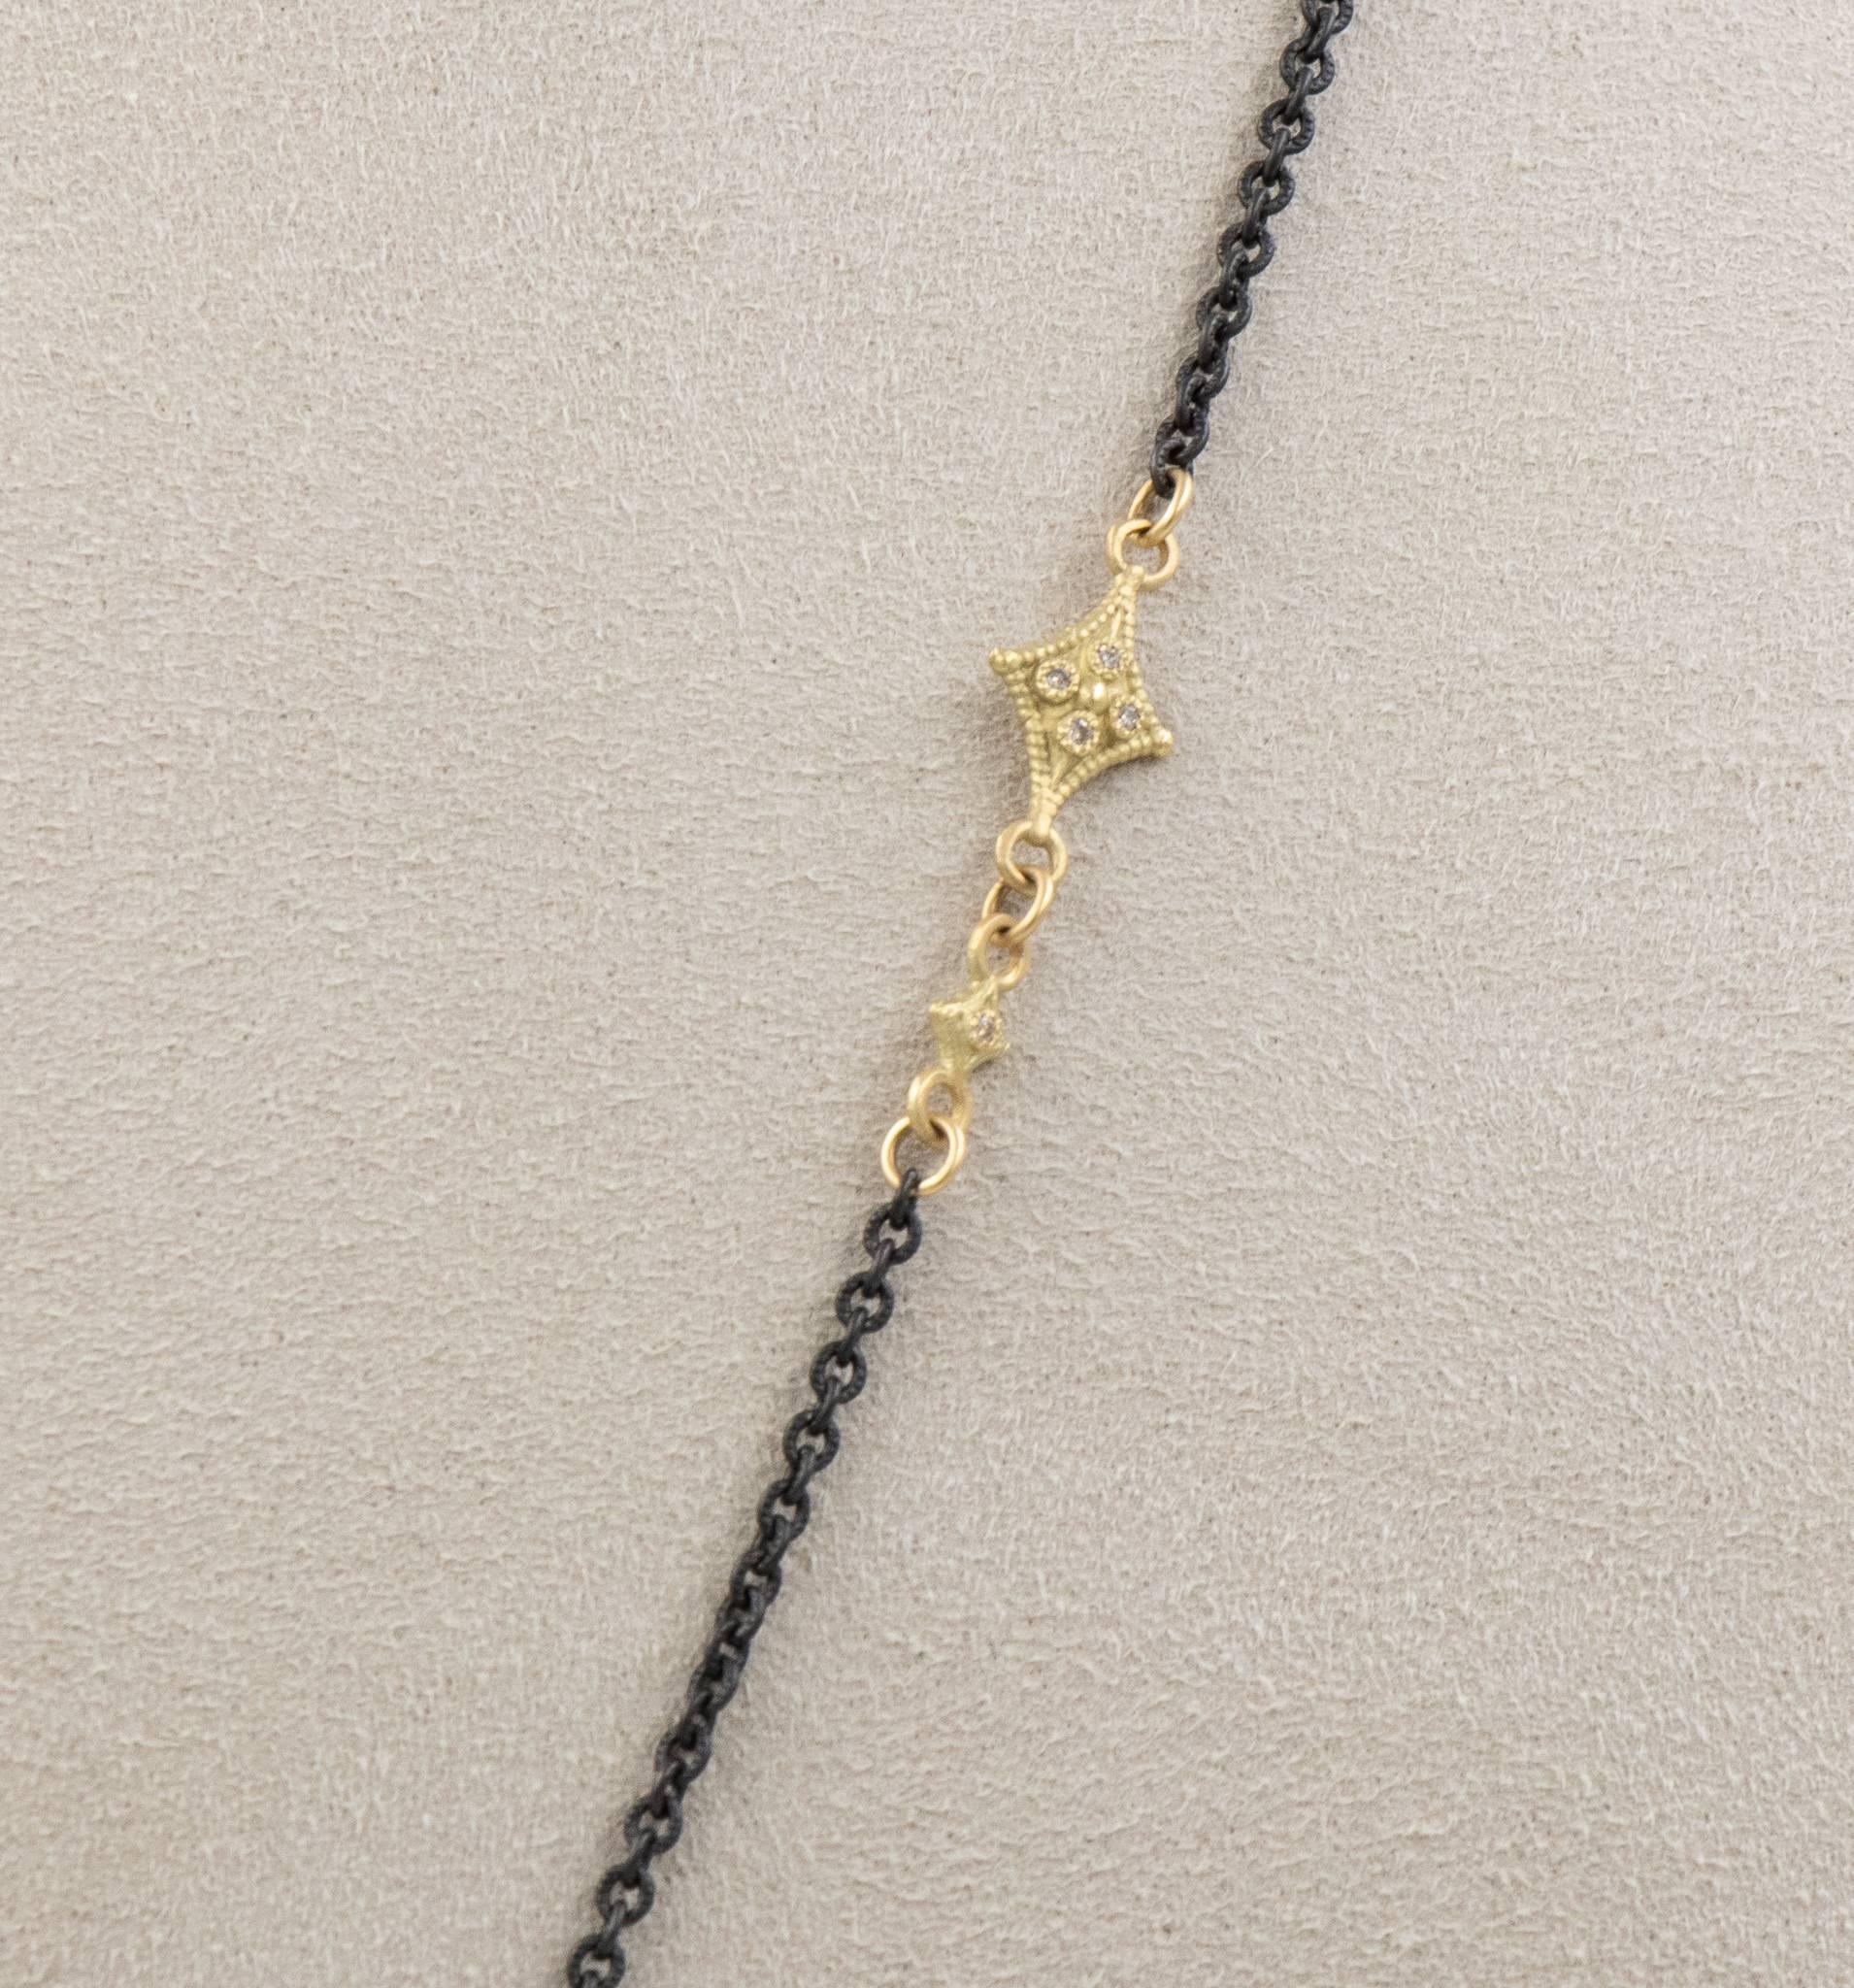 This Armenta lariat necklace from the Old World collection features a 22 inch blackened sterling silver chain with 18 karat yellow gold accents. It also has 12mm bead pendant with pave-set diamonds. 

Internal Measurements:

Total Carat Weight: